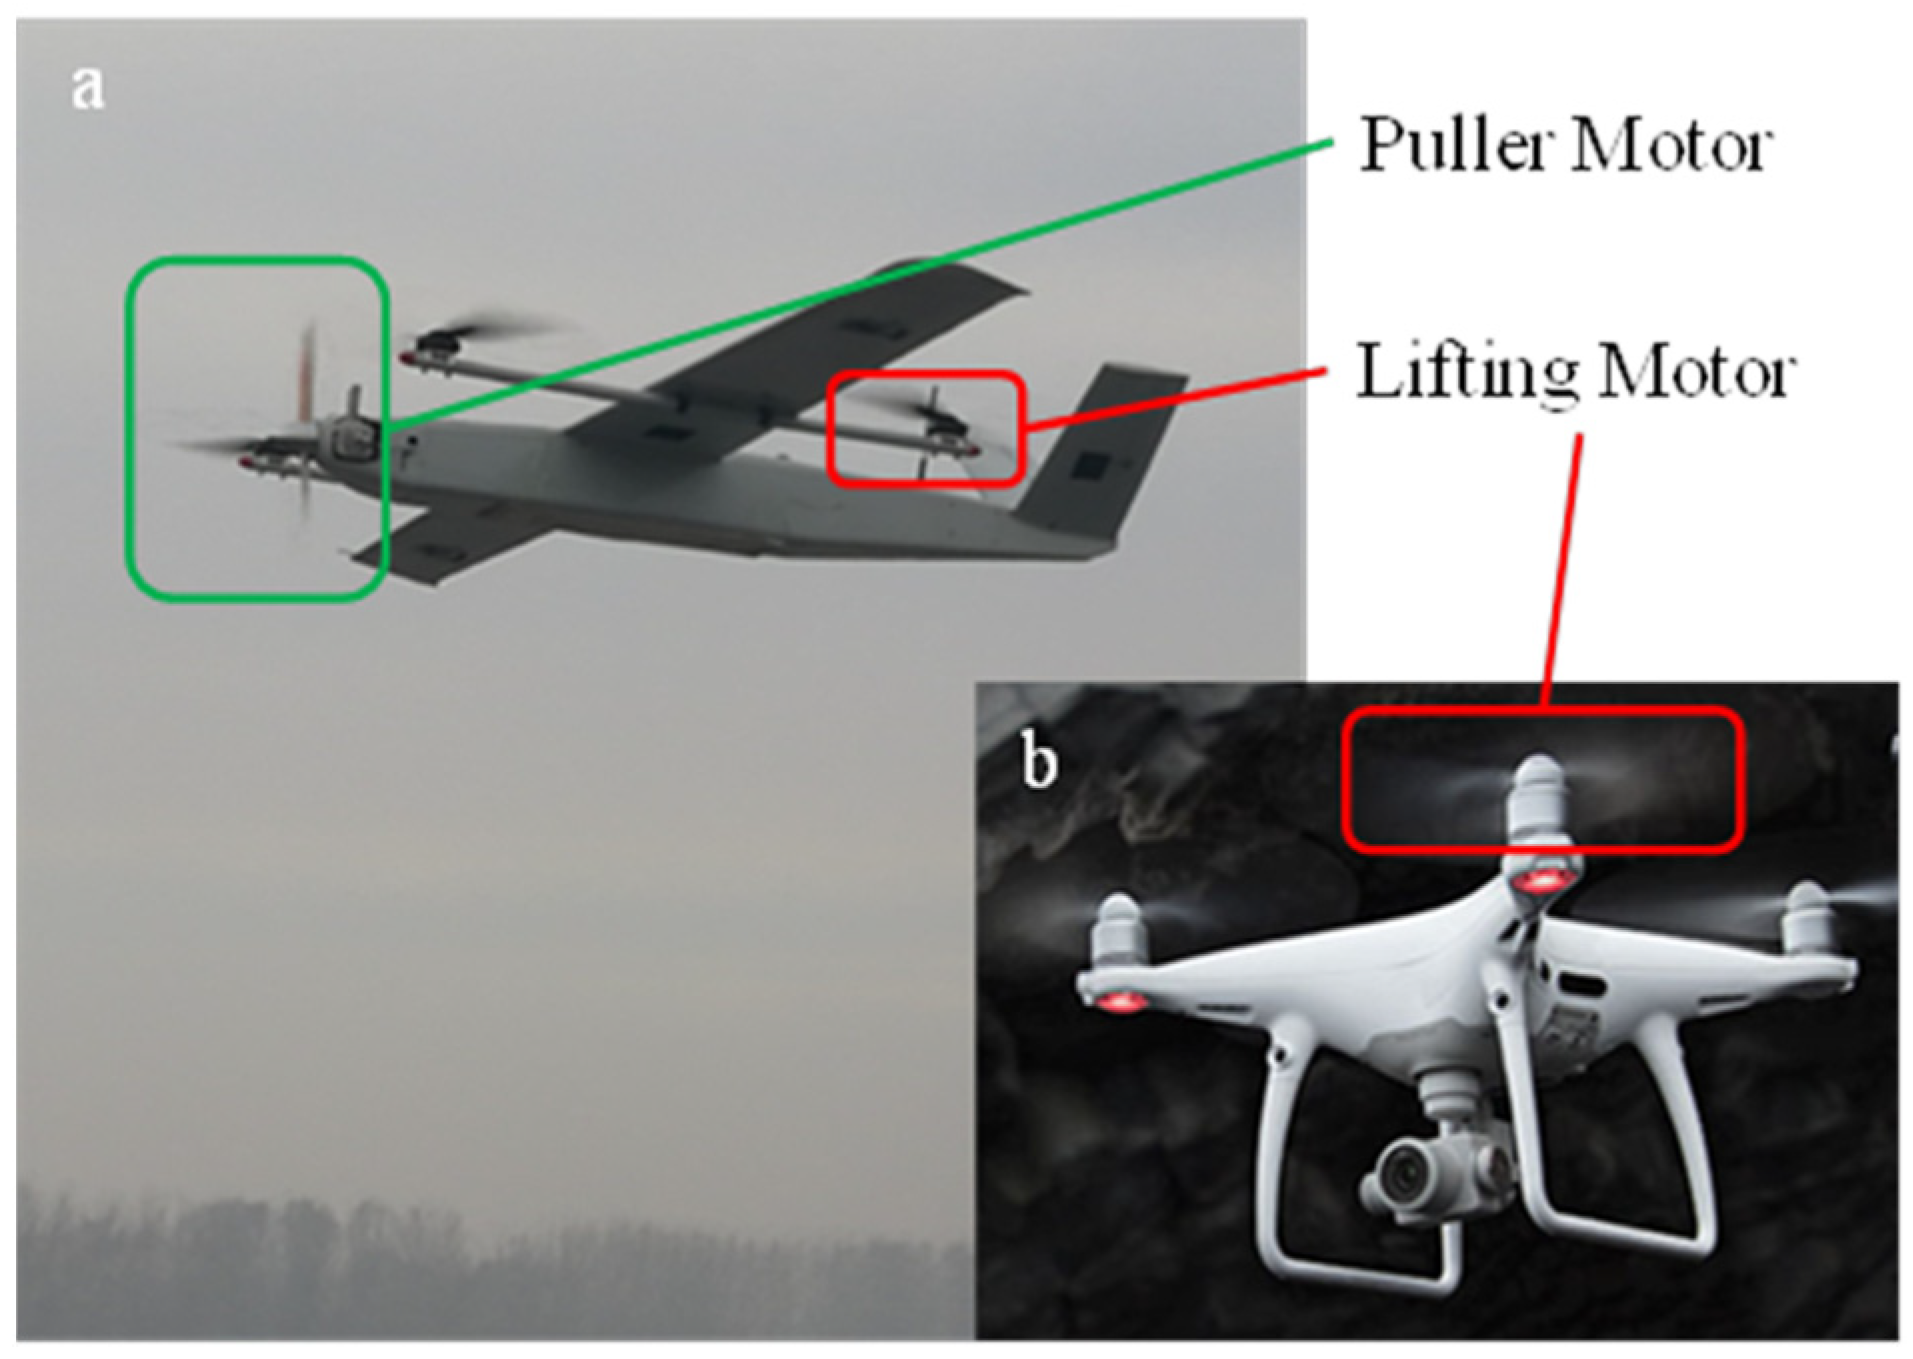 Drones | Free | Comparison Radar Signatures from a Hybrid VTOL Fixed-Wing and Quad-Rotor Drone